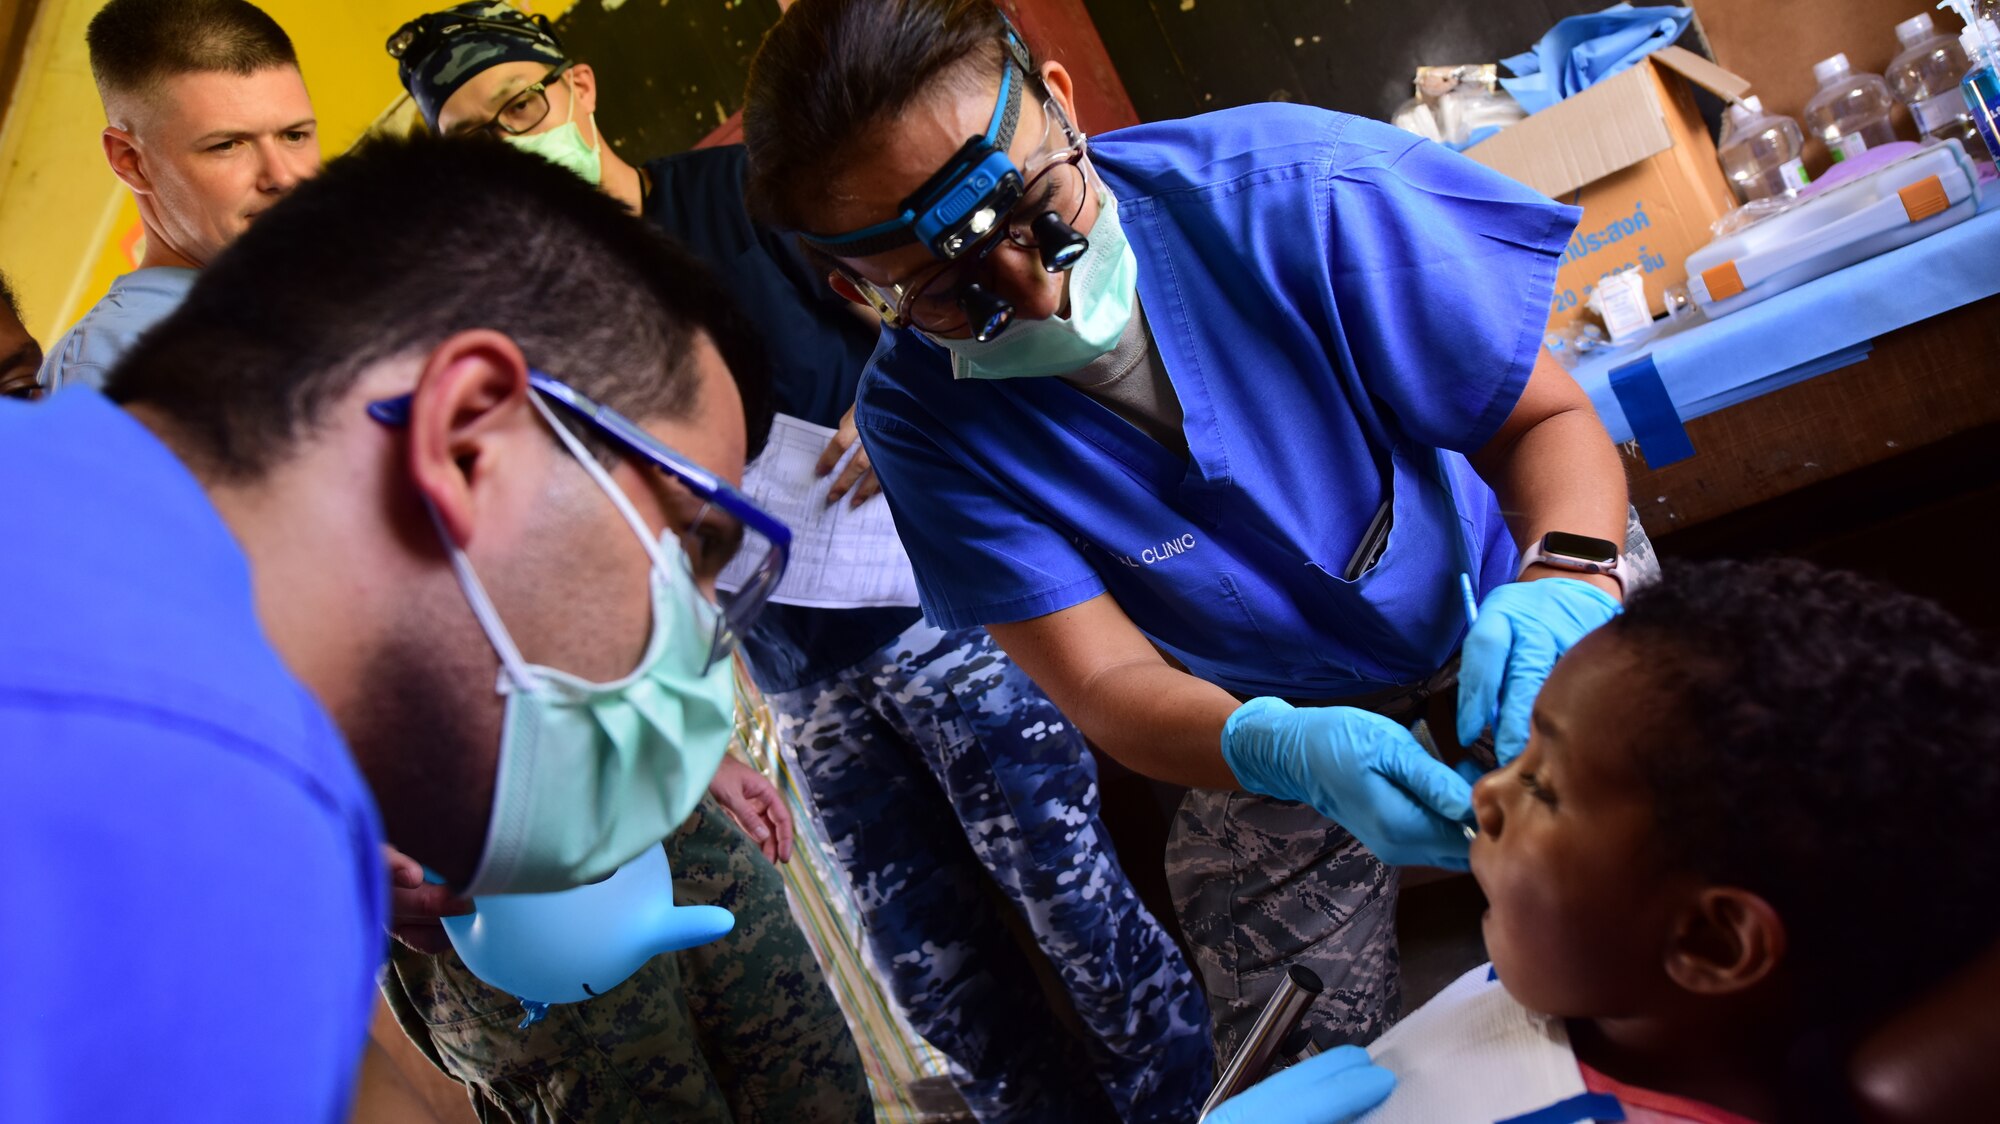 Members of the Pacific Angel 19-4 dental team tend to young patient at a health services outreach site in Lae, Papua New Guinea, Sept. 9, 2019. Pacific Angel is multinational humanitarian assistance civil military engagement, improving military-to-military partnerships in the Pacific through medical health outreach, civic engineering projects and subject matter expert exchanges between U.S. service members, multinational militaries, non-governmental organizations, and PNG military and civilian participants. (U.S. Air Force photo by Tech. Sgt. Jerilyn Quintanilla)